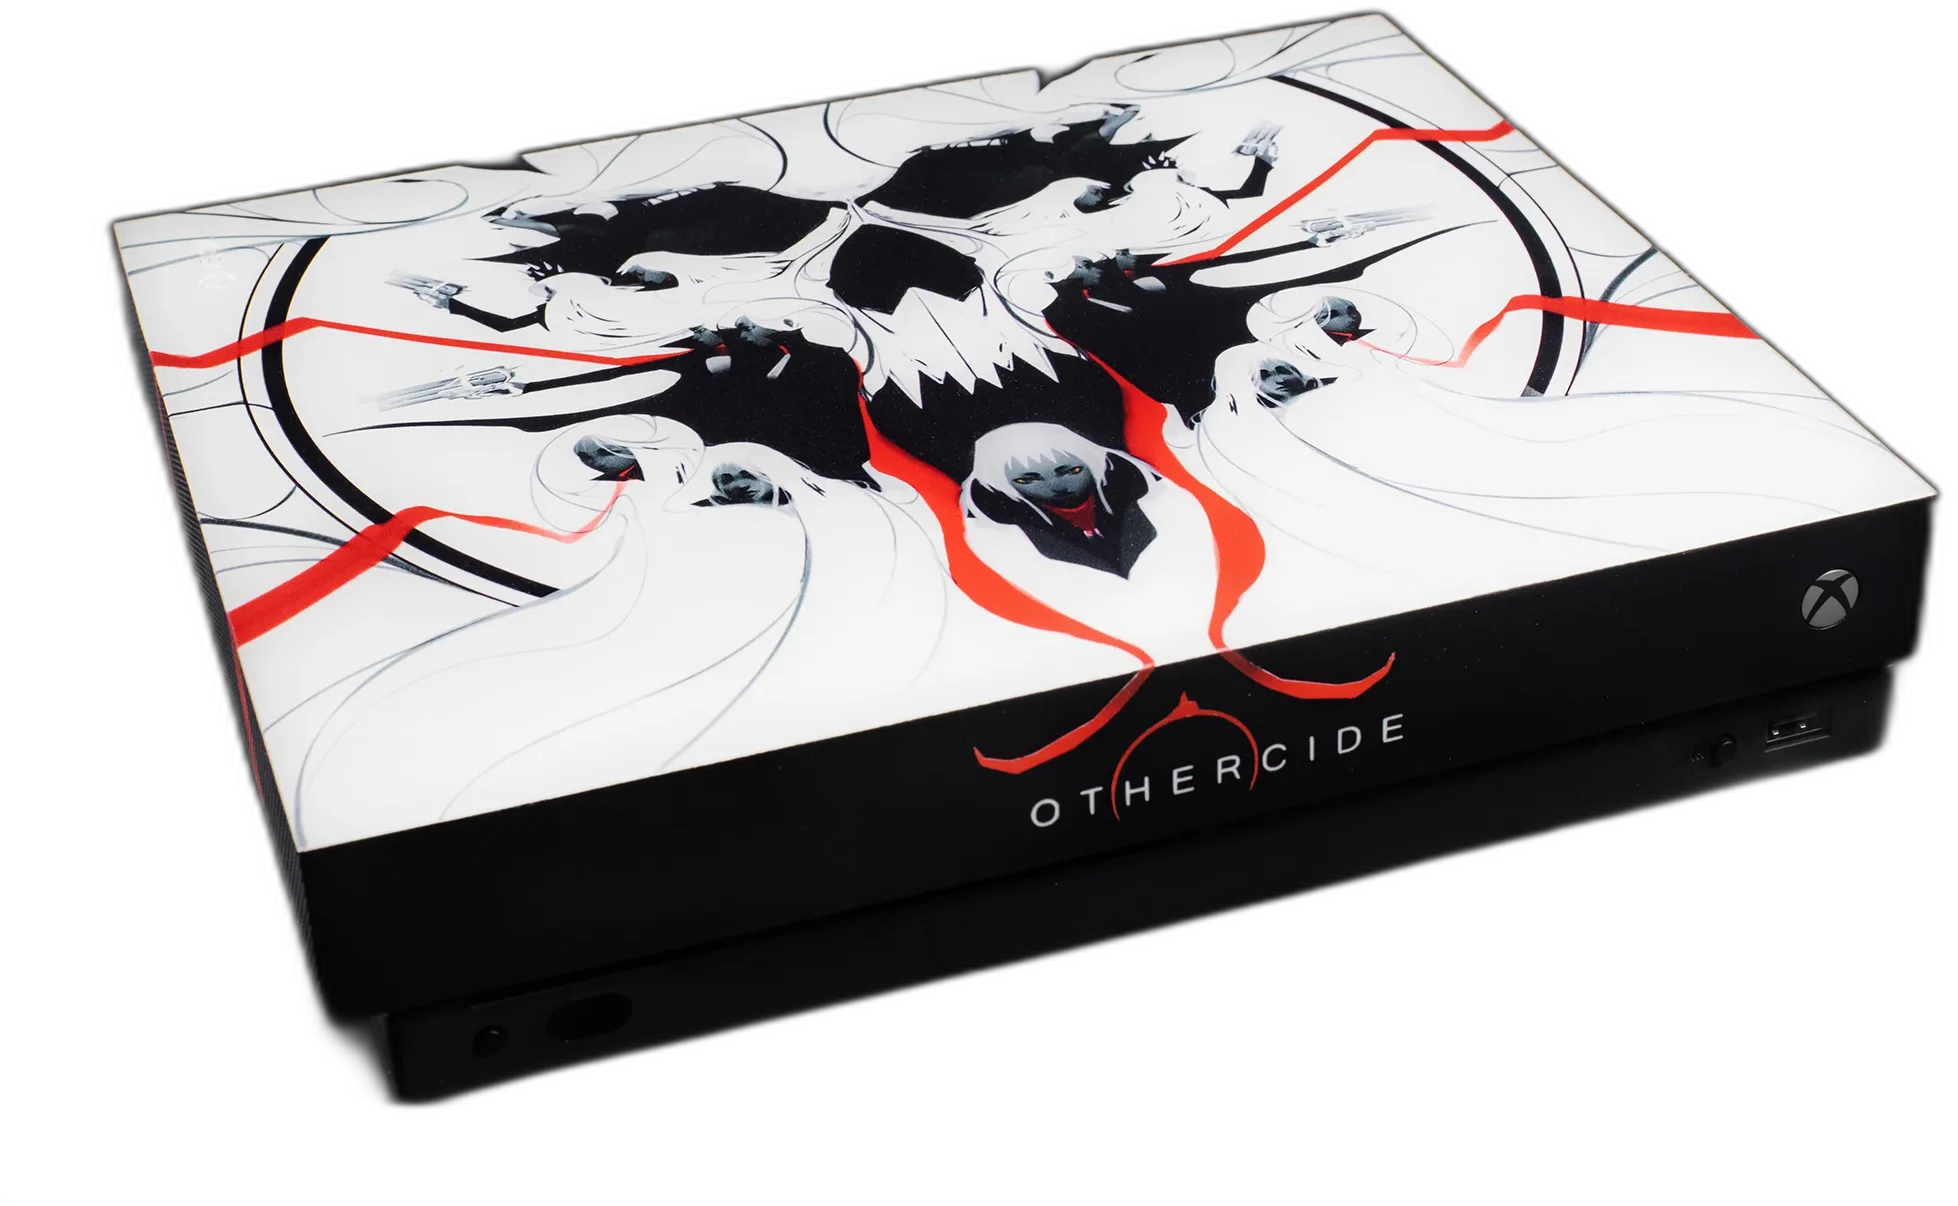  Microsoft Xbox One X Othercide Console